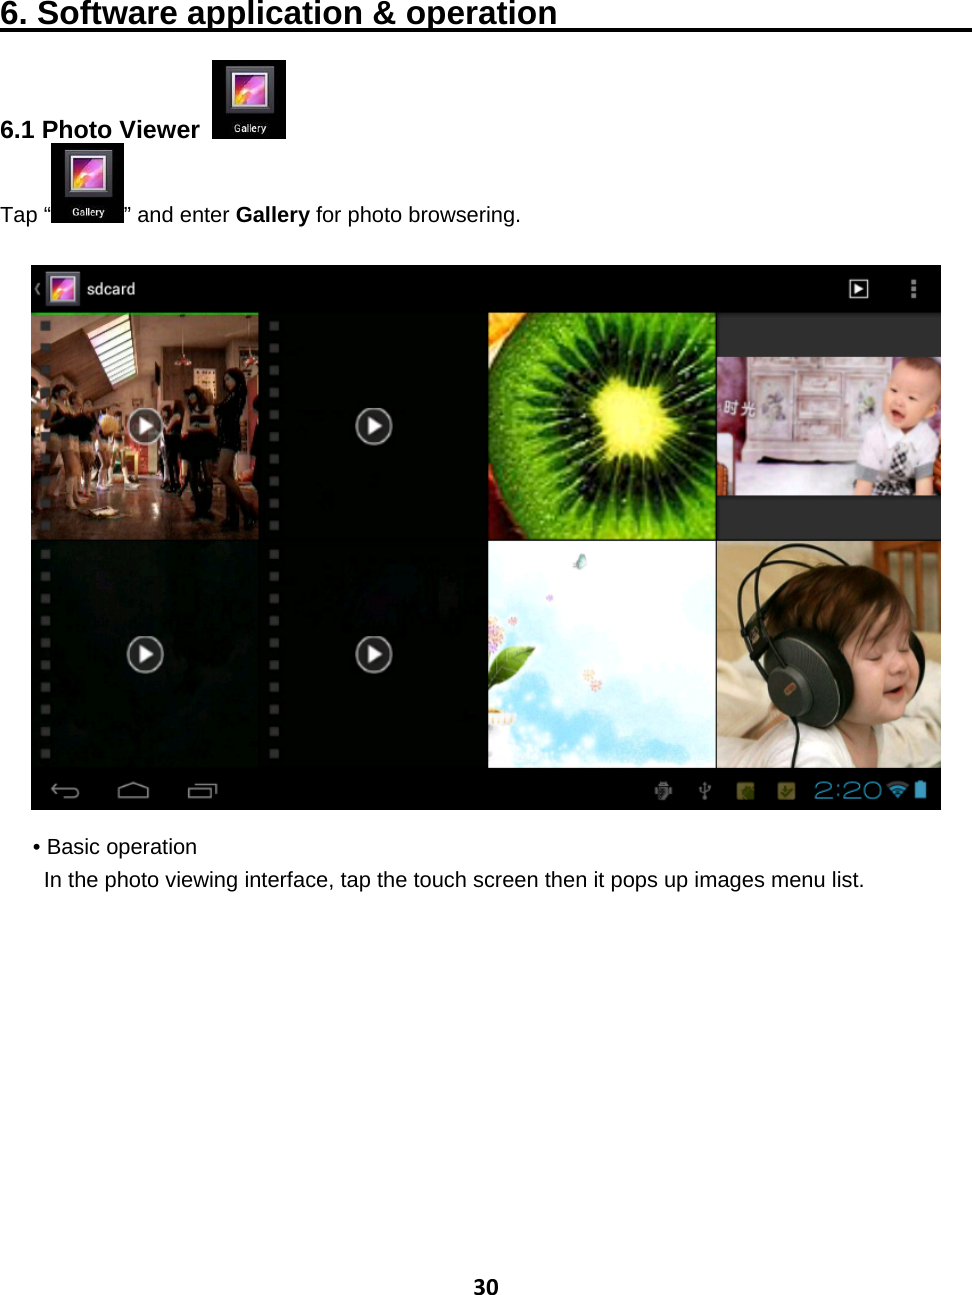 306. Software application &amp; operation                           6.1 Photo Viewer   Tap “ ” and enter Gallery for photo browsering.    • Basic operation In the photo viewing interface, tap the touch screen then it pops up images menu list. 